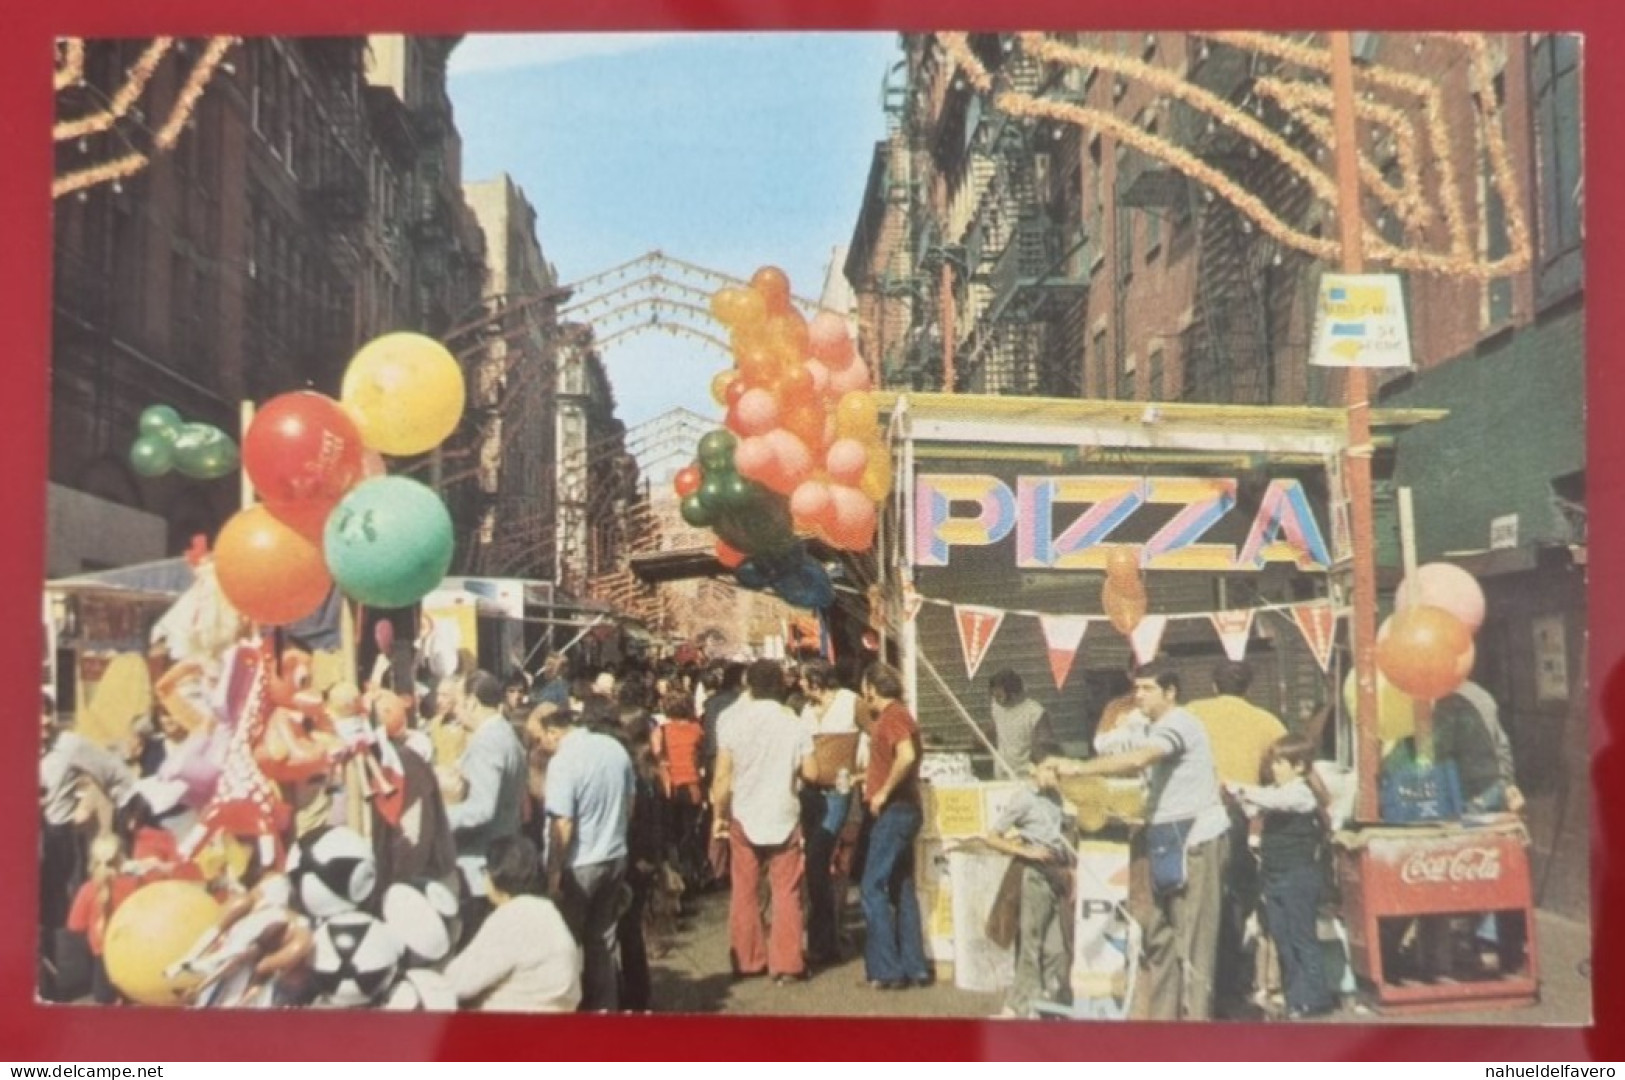 Uncirculated Postcard - USA - NY, NEW YORK CITY - SAN GENNARO, An Italian Festival Held On Mulberry Street, Little Italy - Piazze